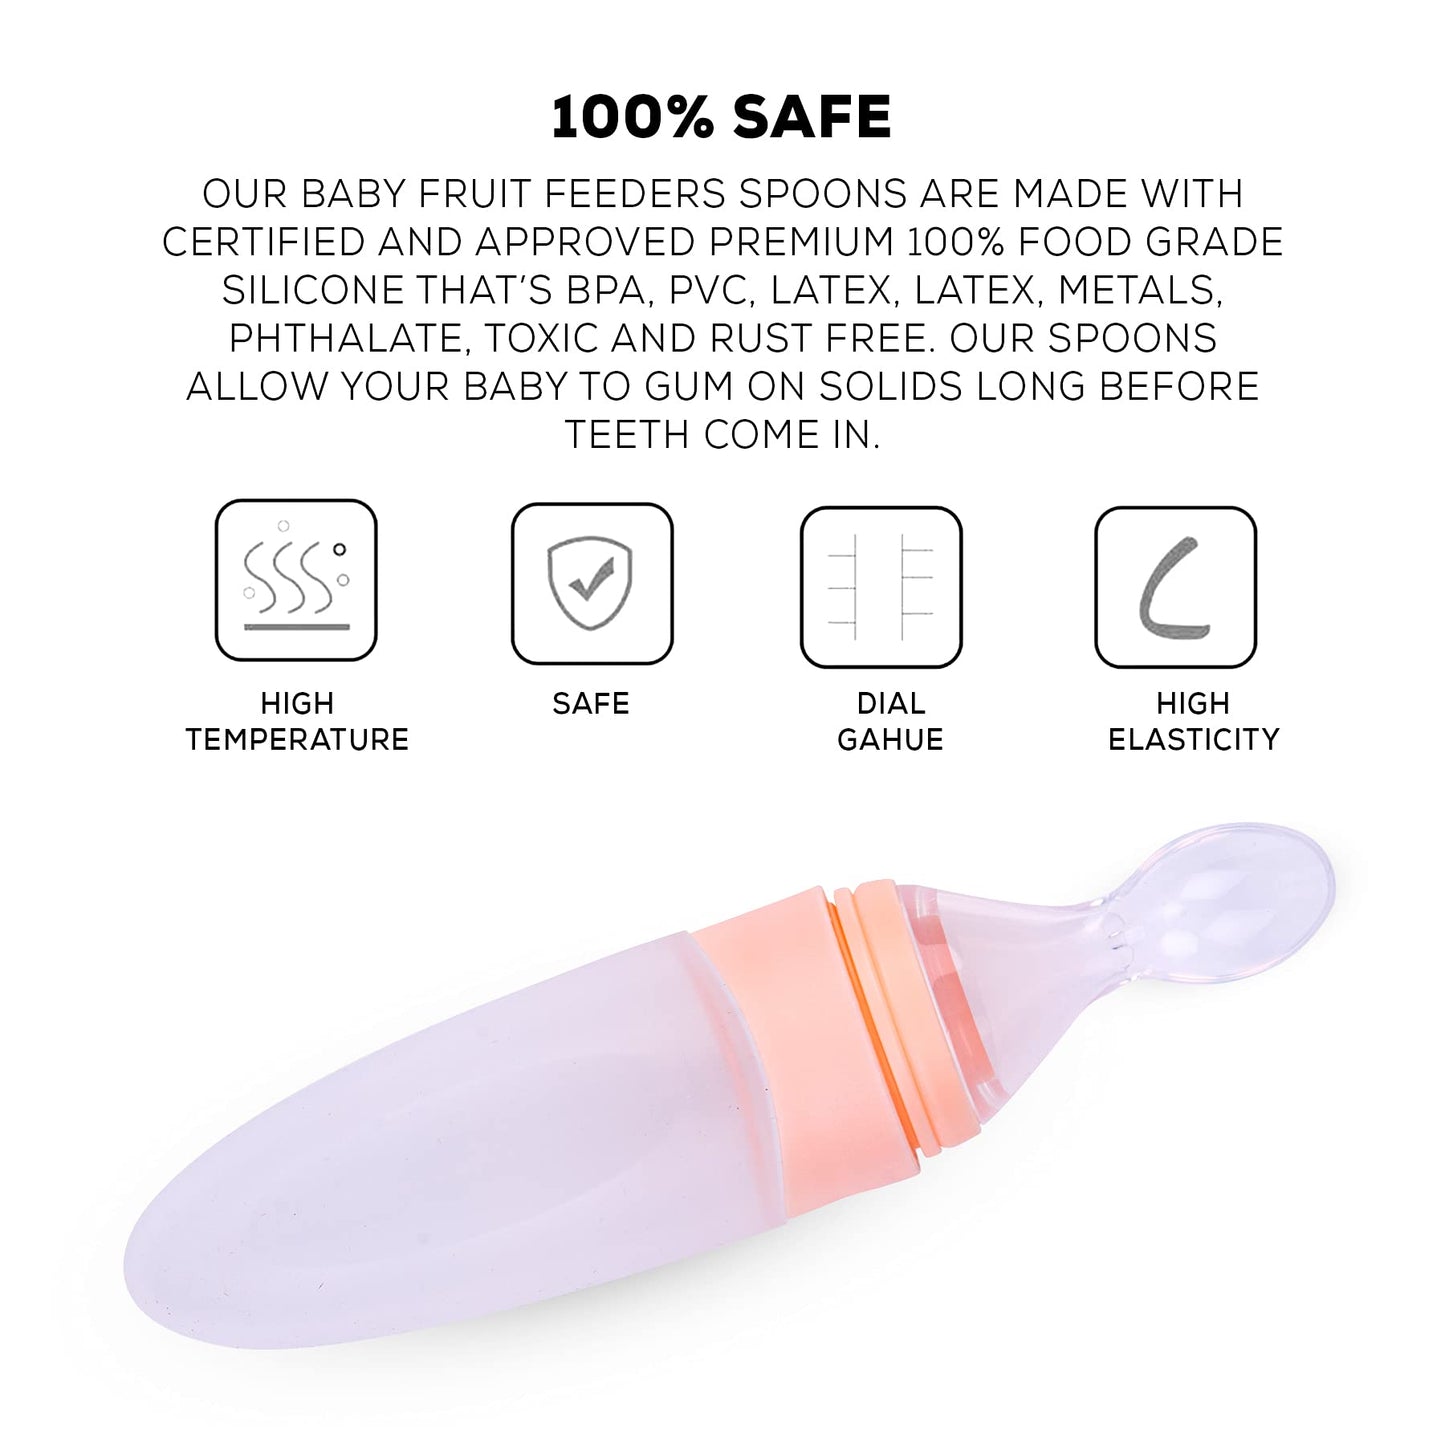 Baybee Infant Silicone Food Feeder, Anti-Colic & BPA Free Squeeze Feeder Bottle with Spoon for Semi-Solid Food for Infants